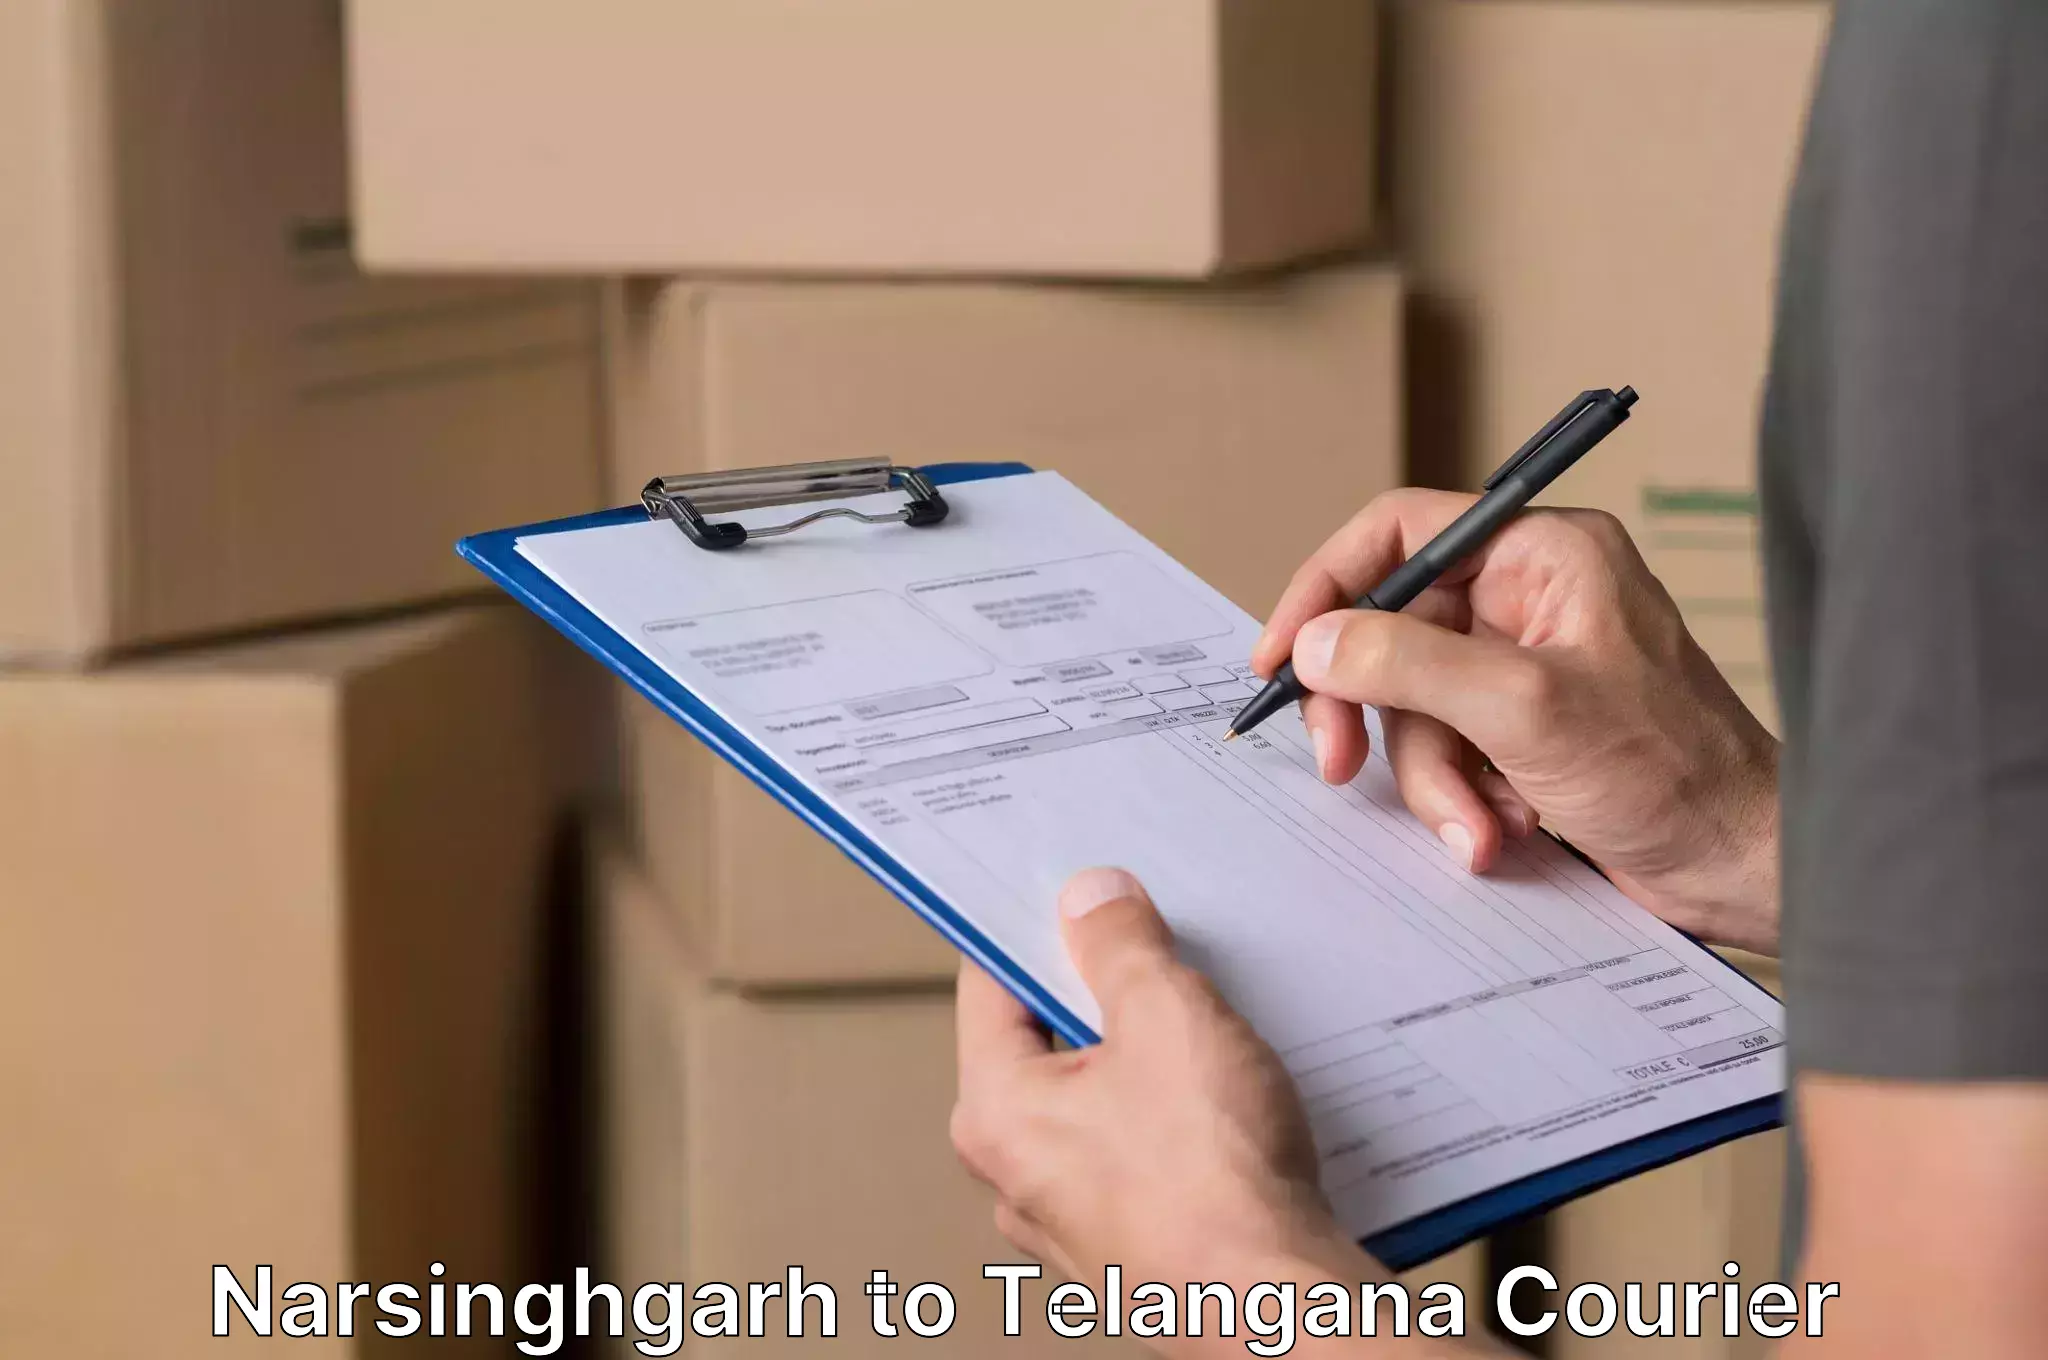 Trusted relocation experts Narsinghgarh to Narayanpet